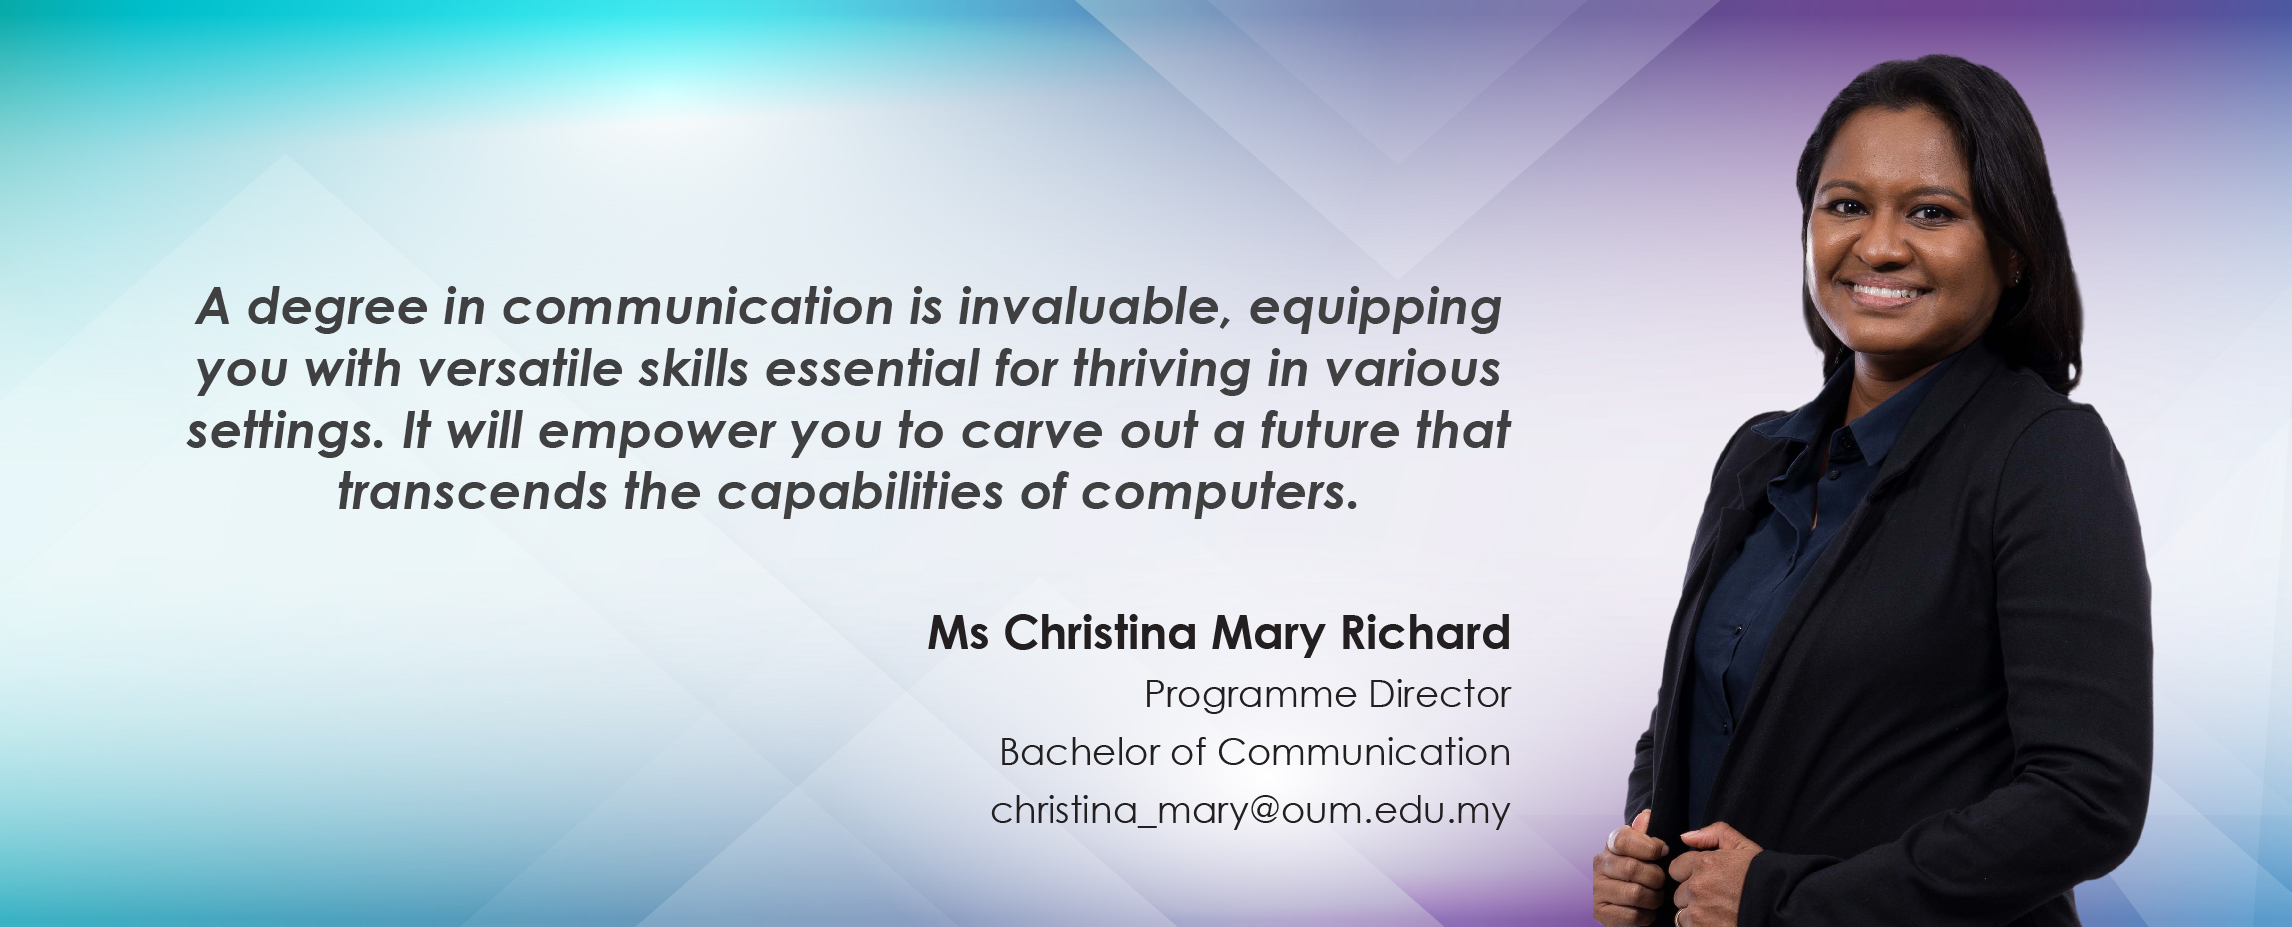 Programme Feature: Bachelor of Communication